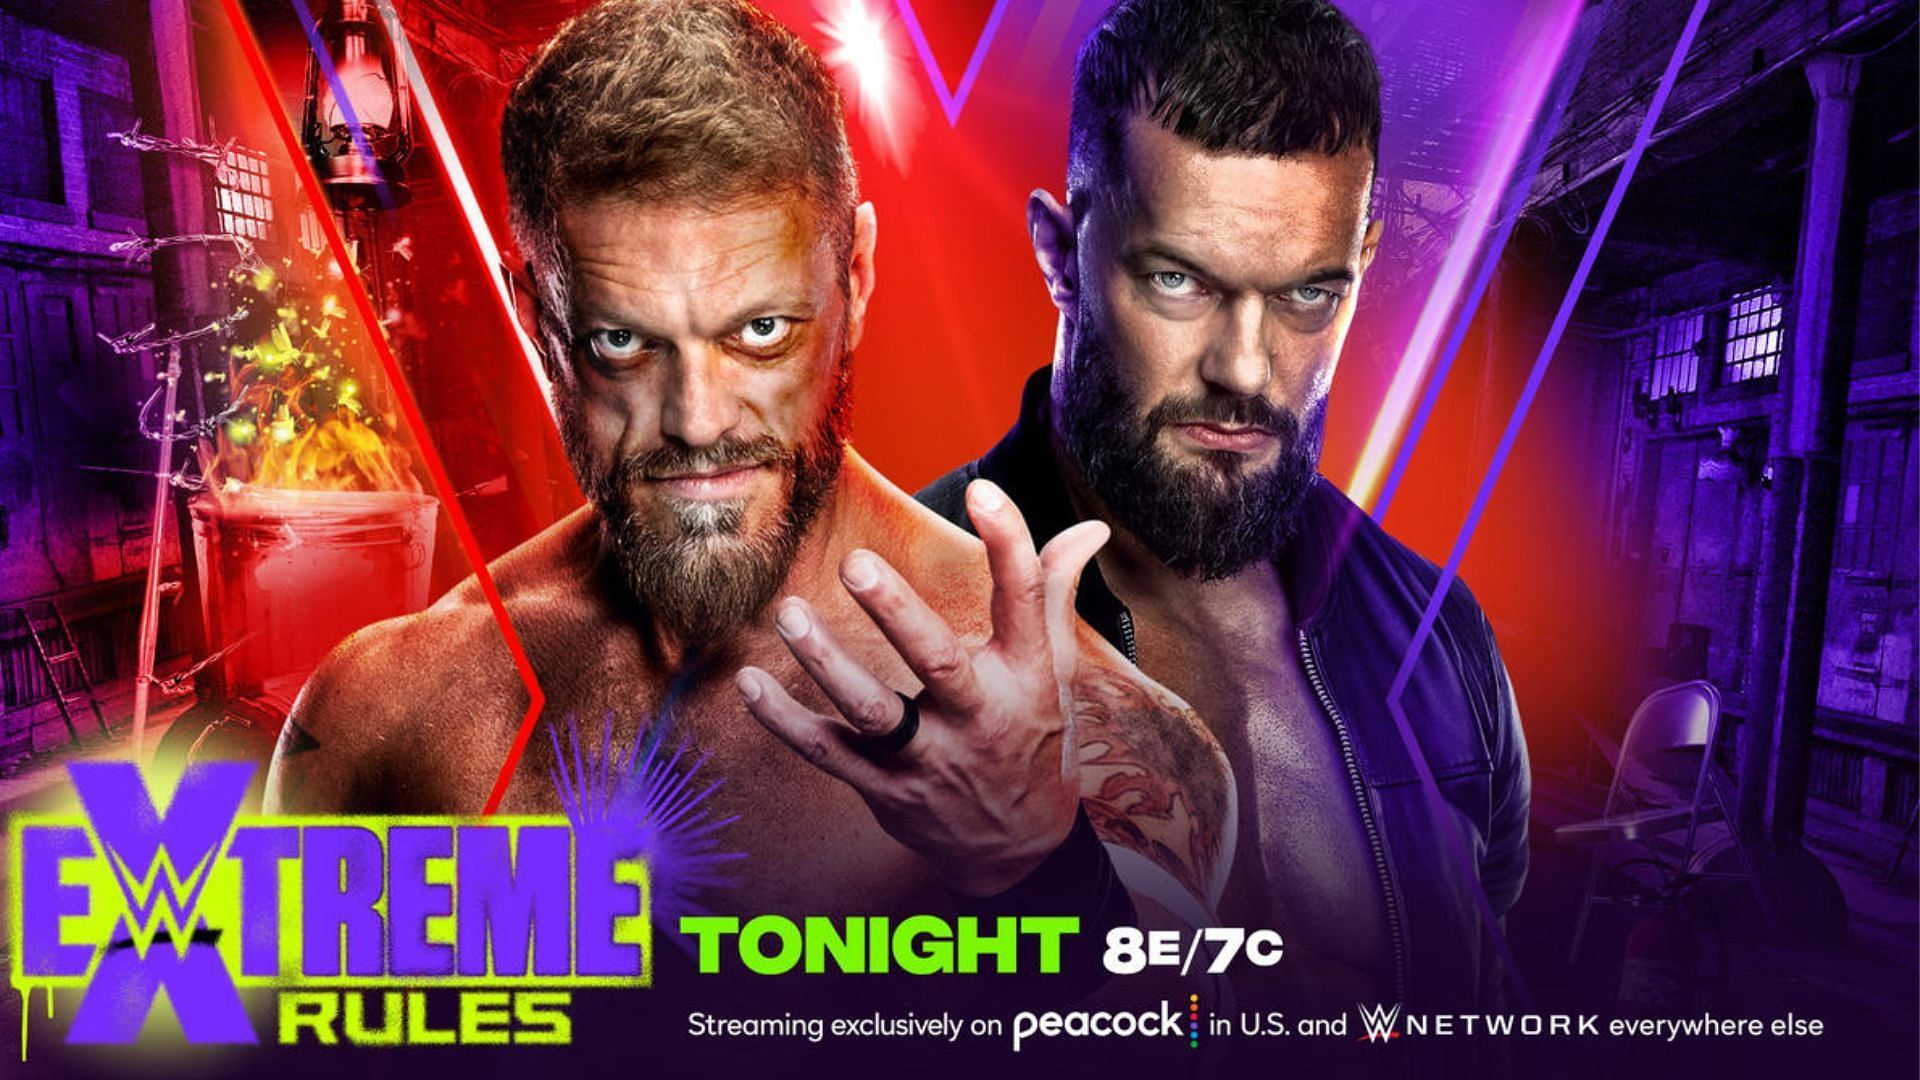 Extreme Rules 2022 will be a night to remember!